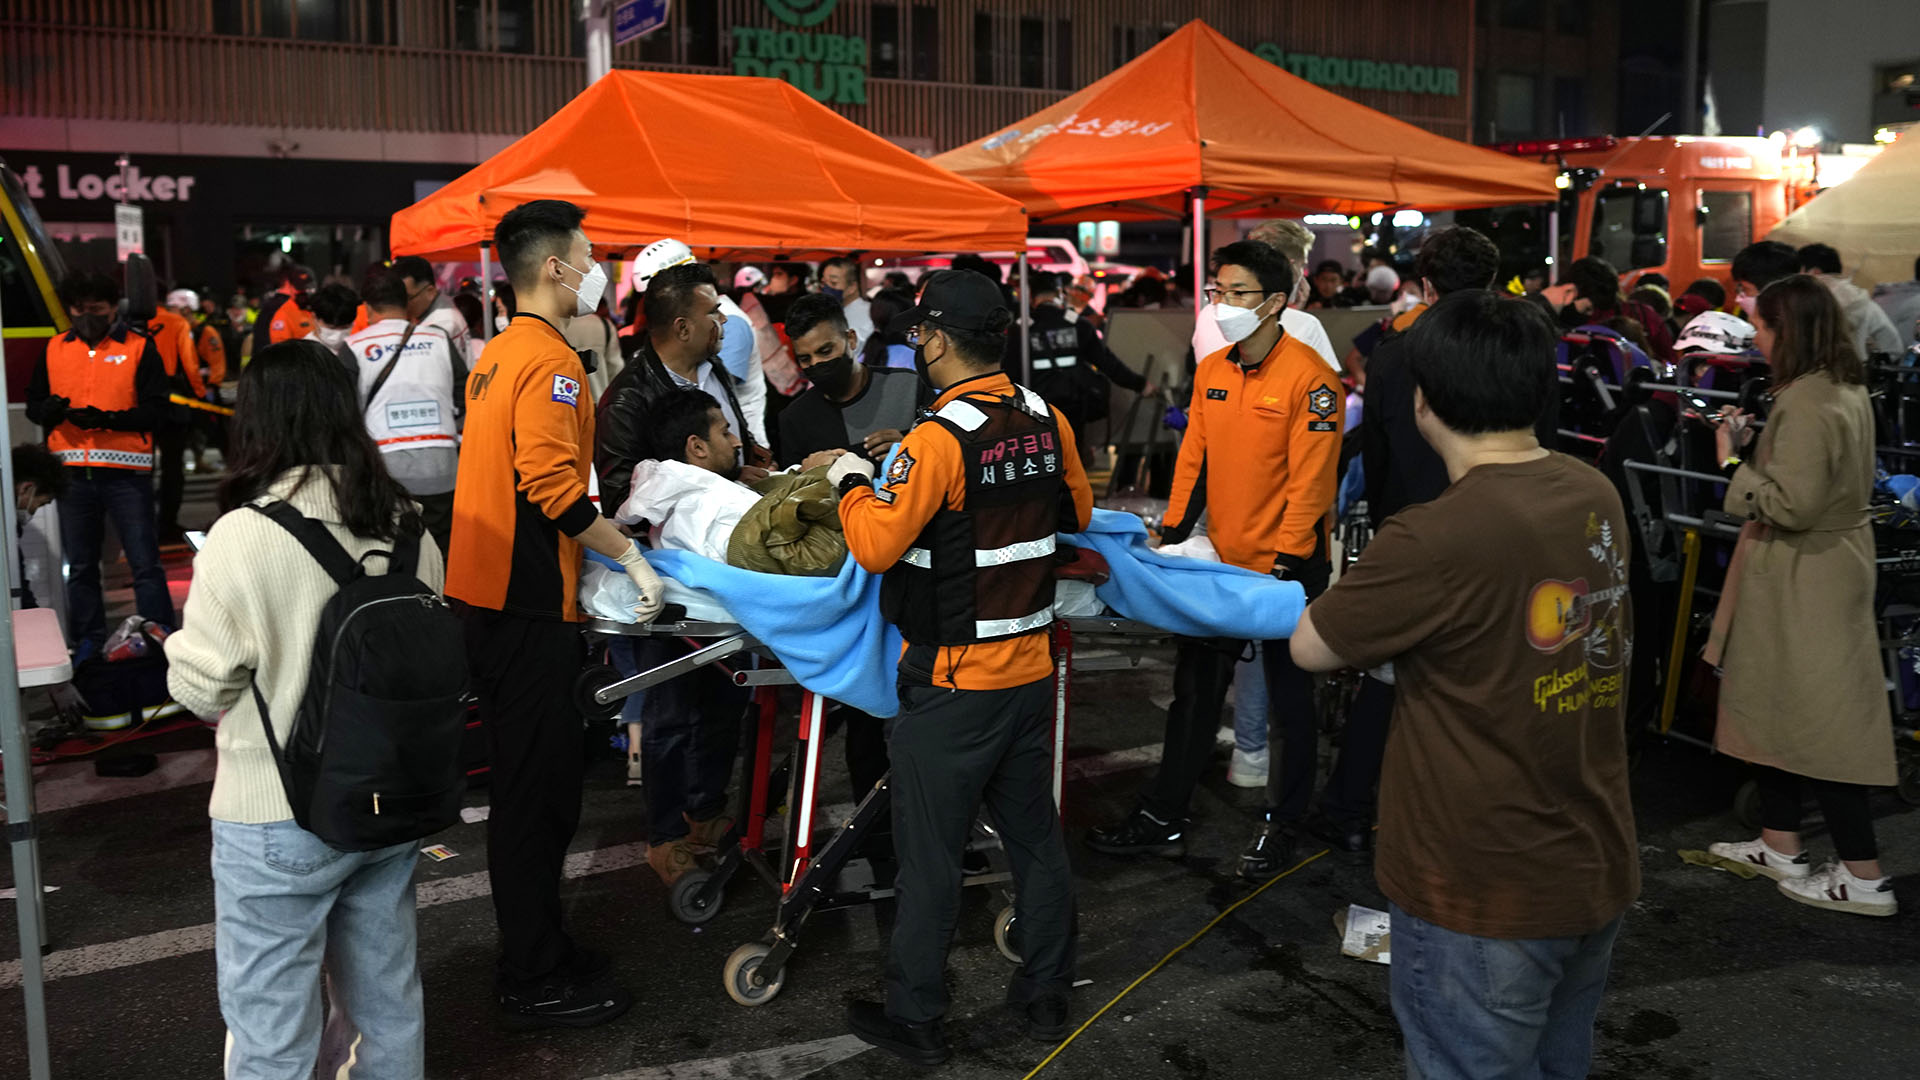 Rescue workers carry injuried people at the street near the scene in Seoul, South Korea, early Sunday, Oct. 30, 2022. South Korean officials said around 50 people were in cardiac arrest and a number feared dead after being crushed by a large crowd pushing forward on a narrow street during Halloween festivities in the capital Seoul. (AP Photo/Lee Jin-man)